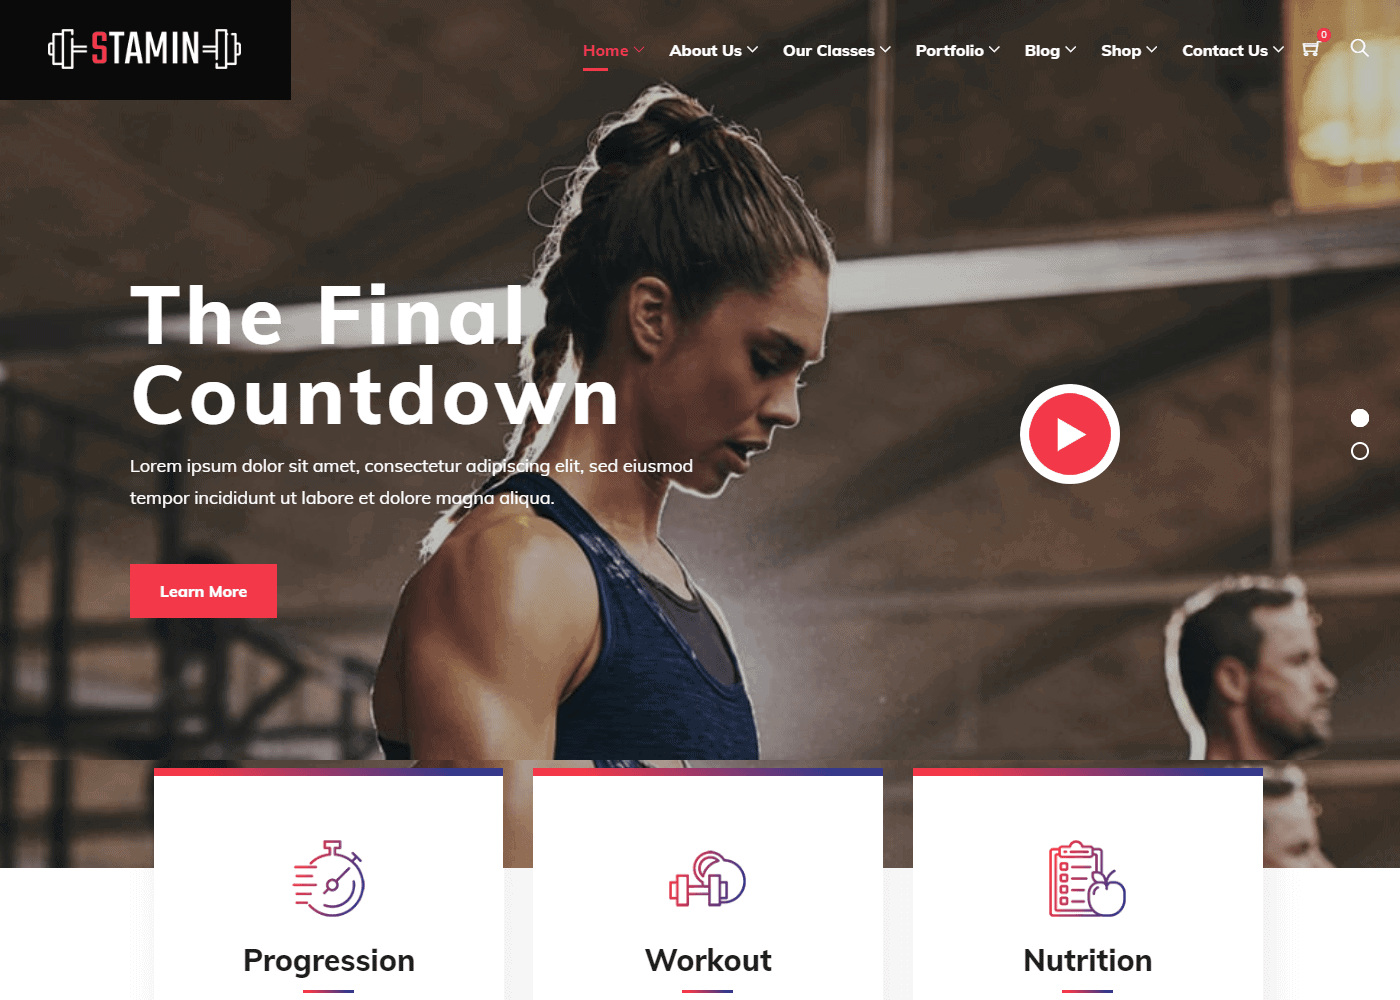 Stamin: Best WordPress Themes for Gym and Fitness